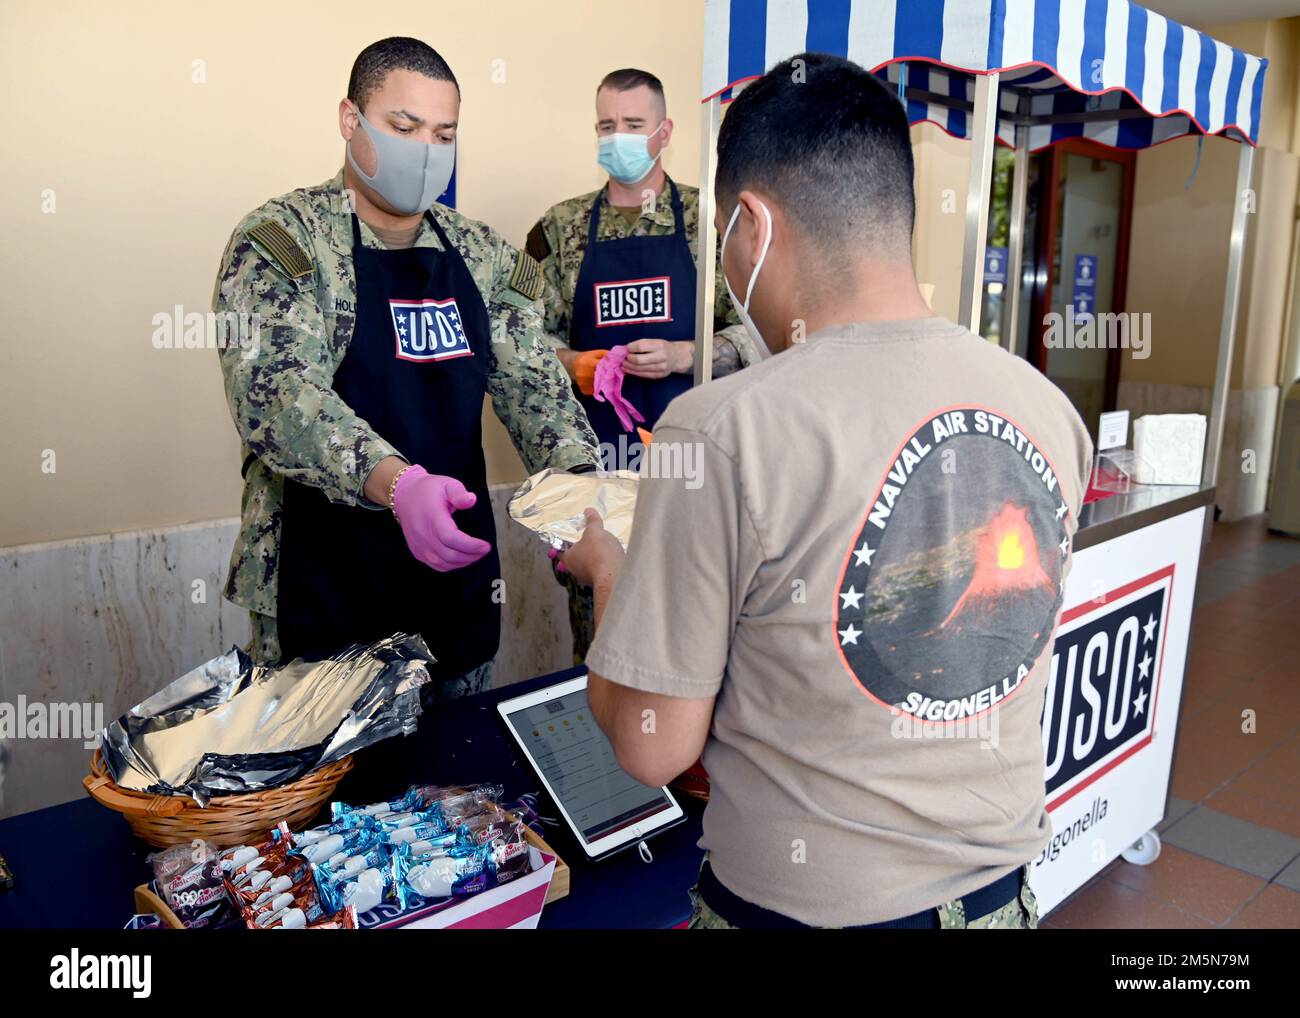 220329-N-OX321-1020 NAVAL AIR STATION SIGONELLA, Italy (March 29, 2022) – Senior Chief Intelligence Specialist Robert Holder from St. Thomas, Virgin Islands, serves lunch at the USO Troop Lunch to help raise awareness for the Chief’s Birthday at Naval Air Station Sigonella on March 29, 2022. NAS Sigonella’s strategic location enables U.S., allied, and partner nation forces to deploy and respond as required, ensuring security and stability in Europe, Africa, and Central Command. Stock Photo